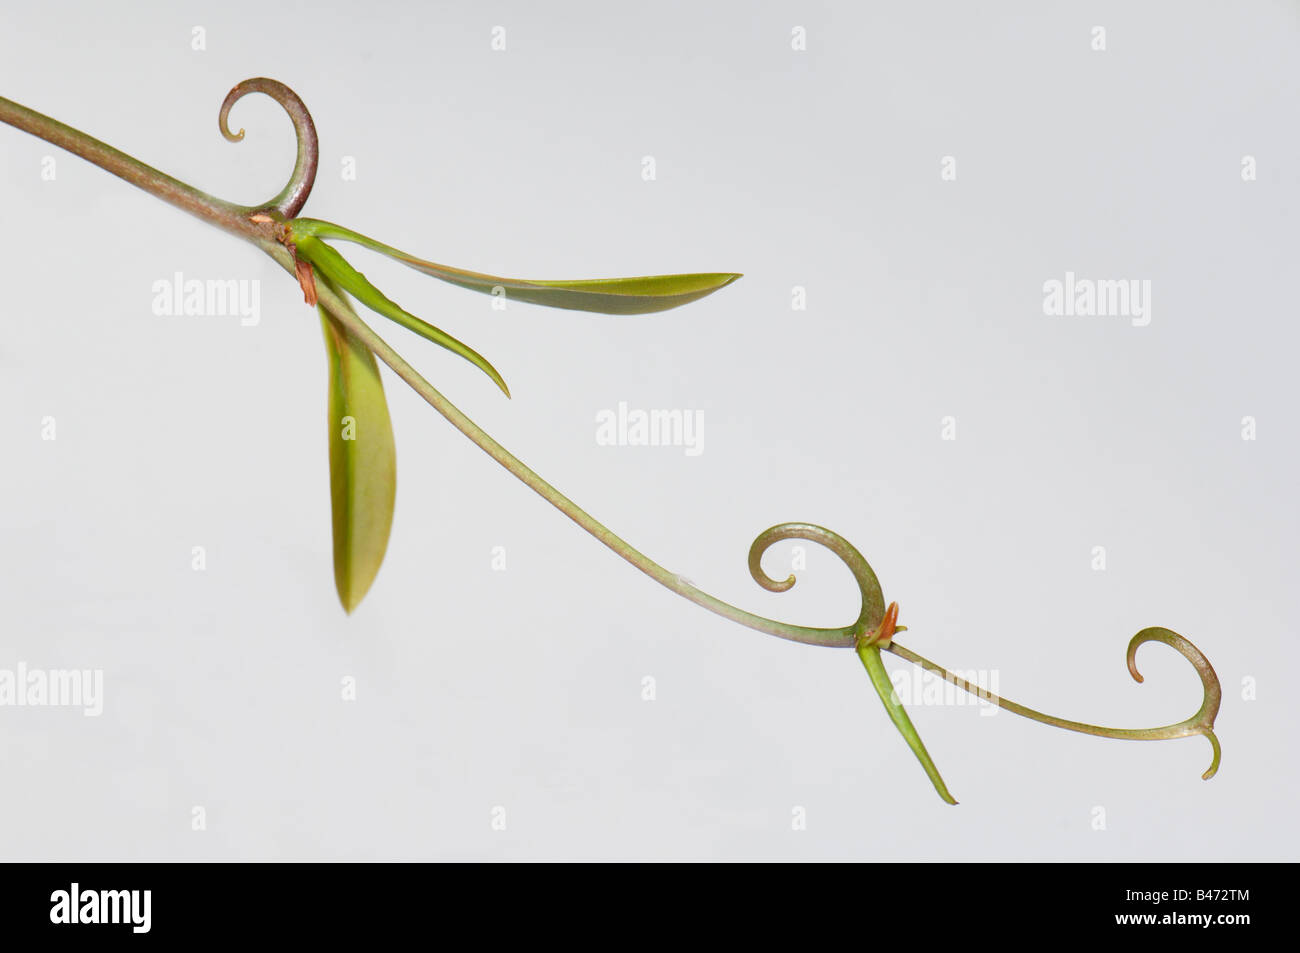 Liana (Ancistrocladus benomensis). Twig with hooks for climbing Stock Photo